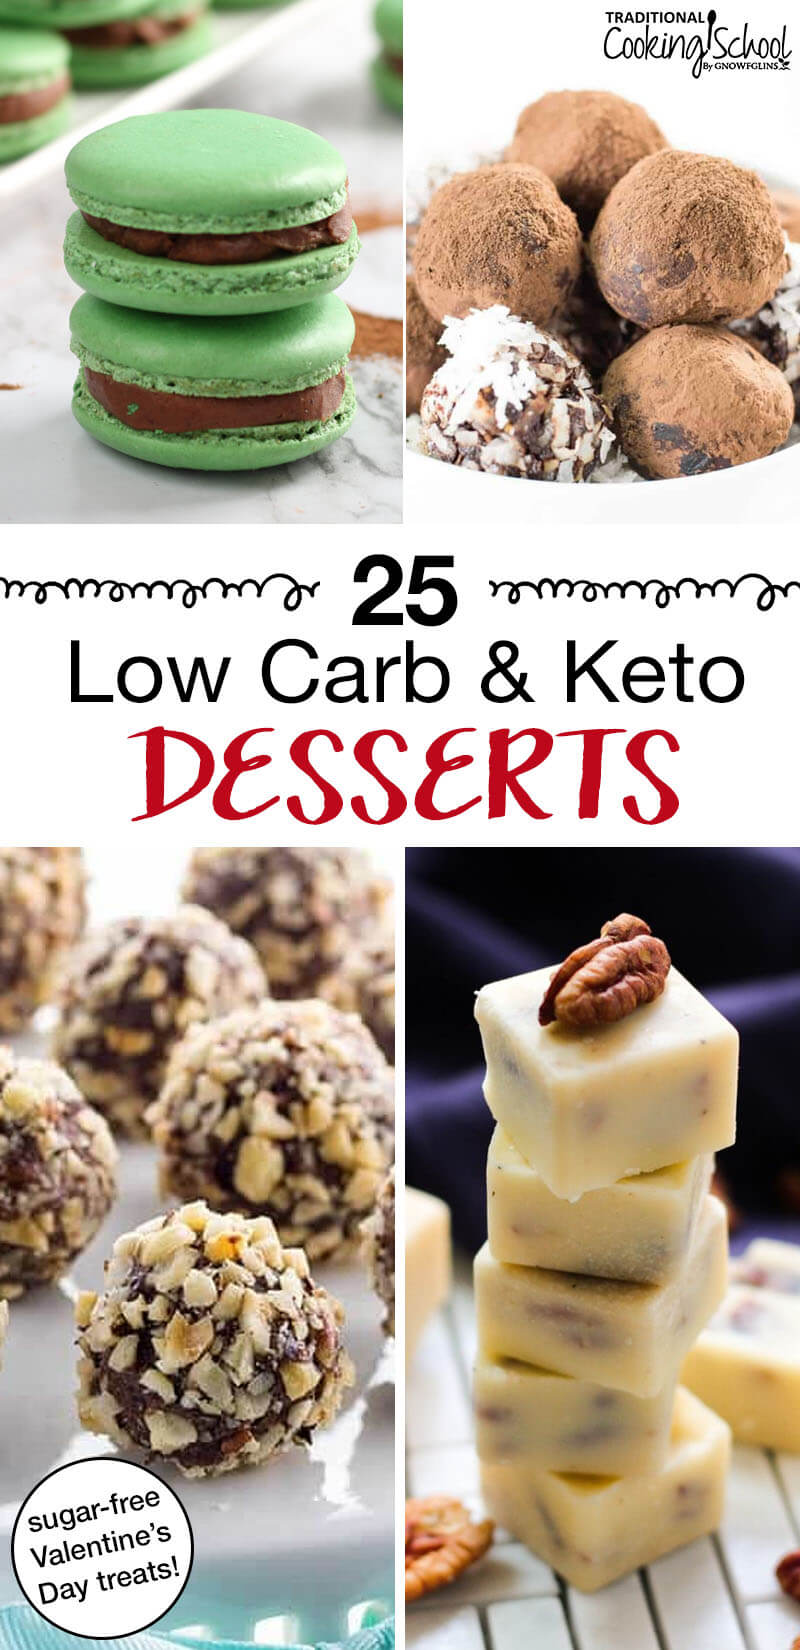 photo collage of low carb desserts with text overlay: "25 Low Carb & Keto Desserts (Sugar-Free Valentine's Day Treats!)"